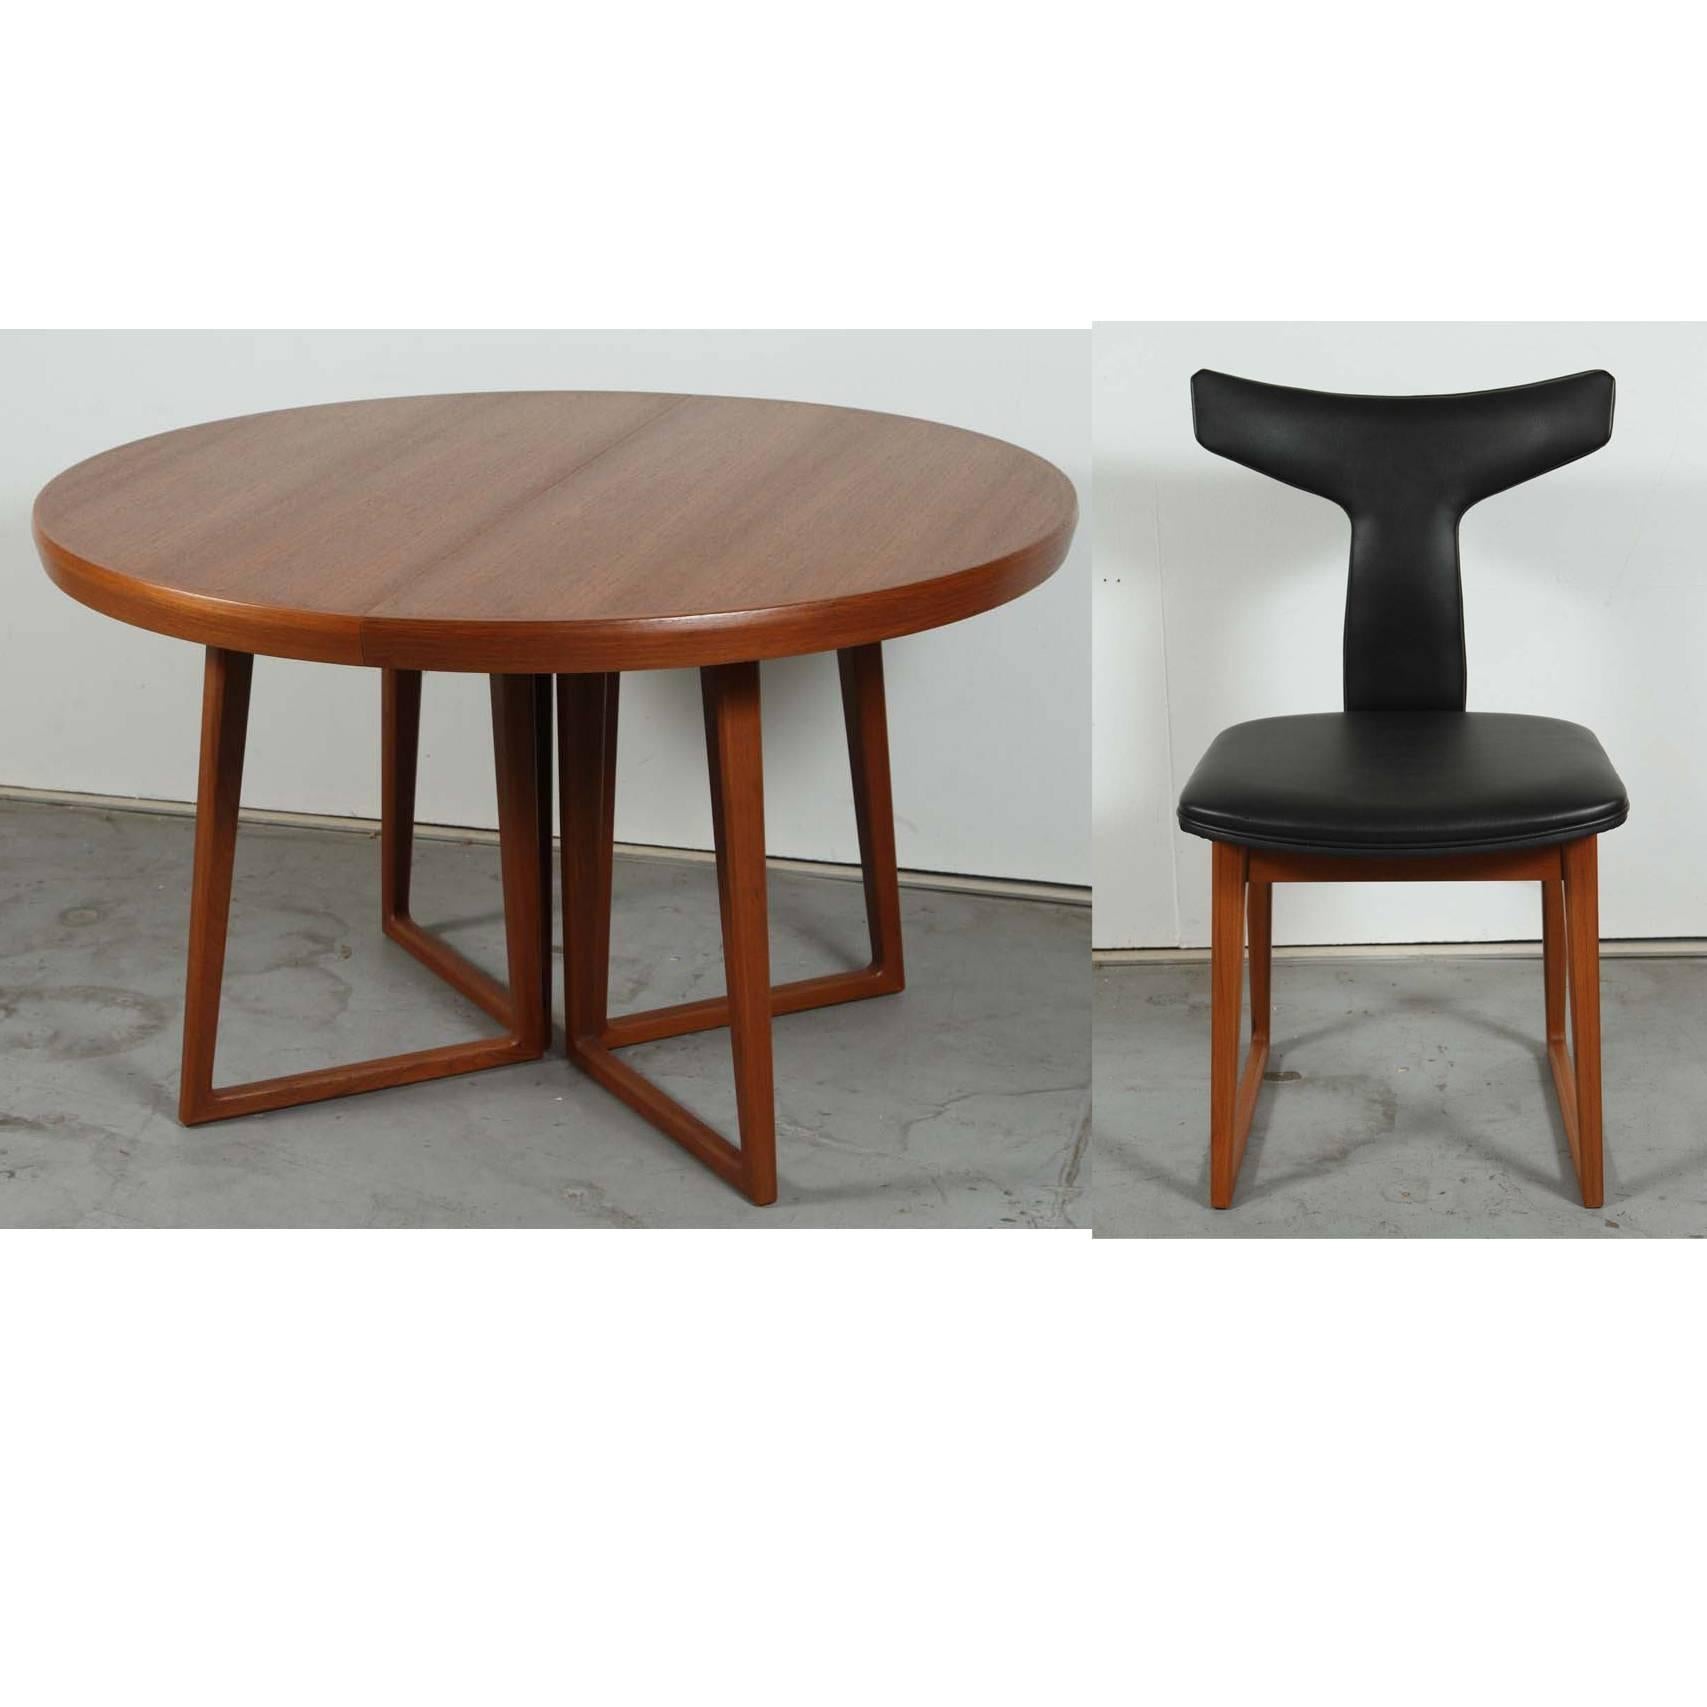 This amazing and quite rare Danish Modern dining set by Arne Vodder includes: One Mid-Century refinished teak expanding dining table (with two leaves) and six newly upholstered black vinyl dining chairs (as was found on chairs originally). Starts as